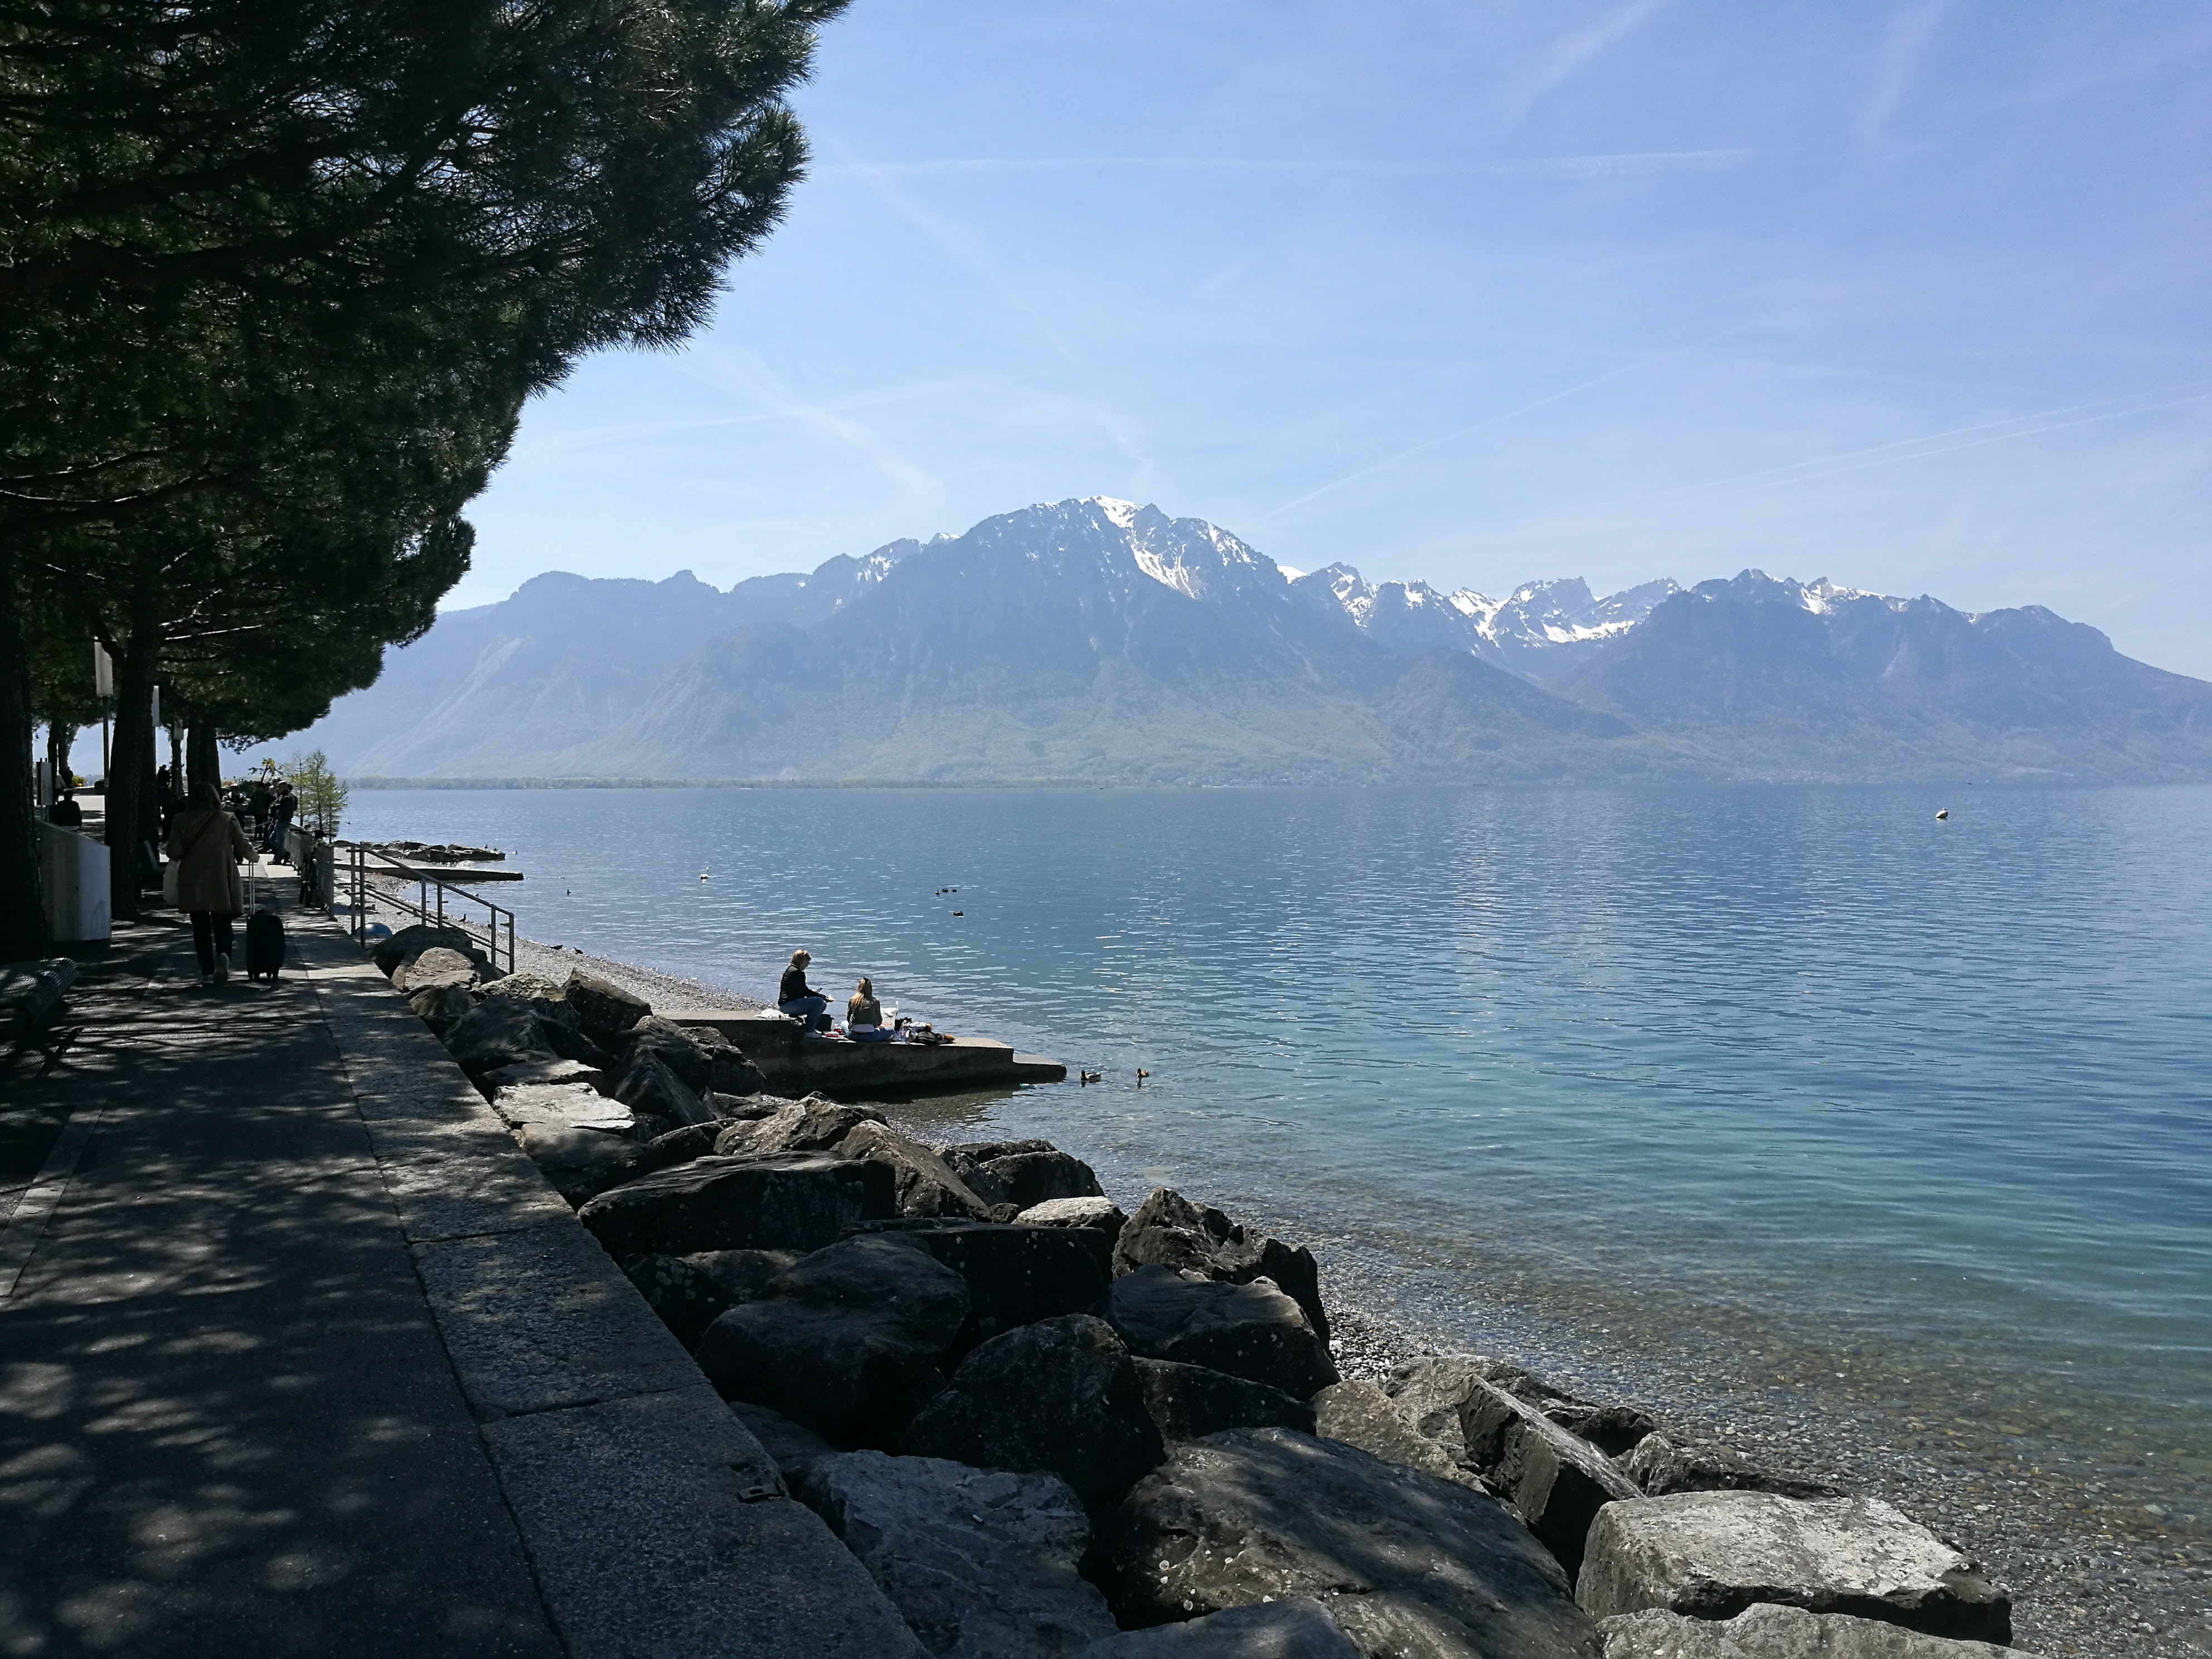 The waterfront at Montreux